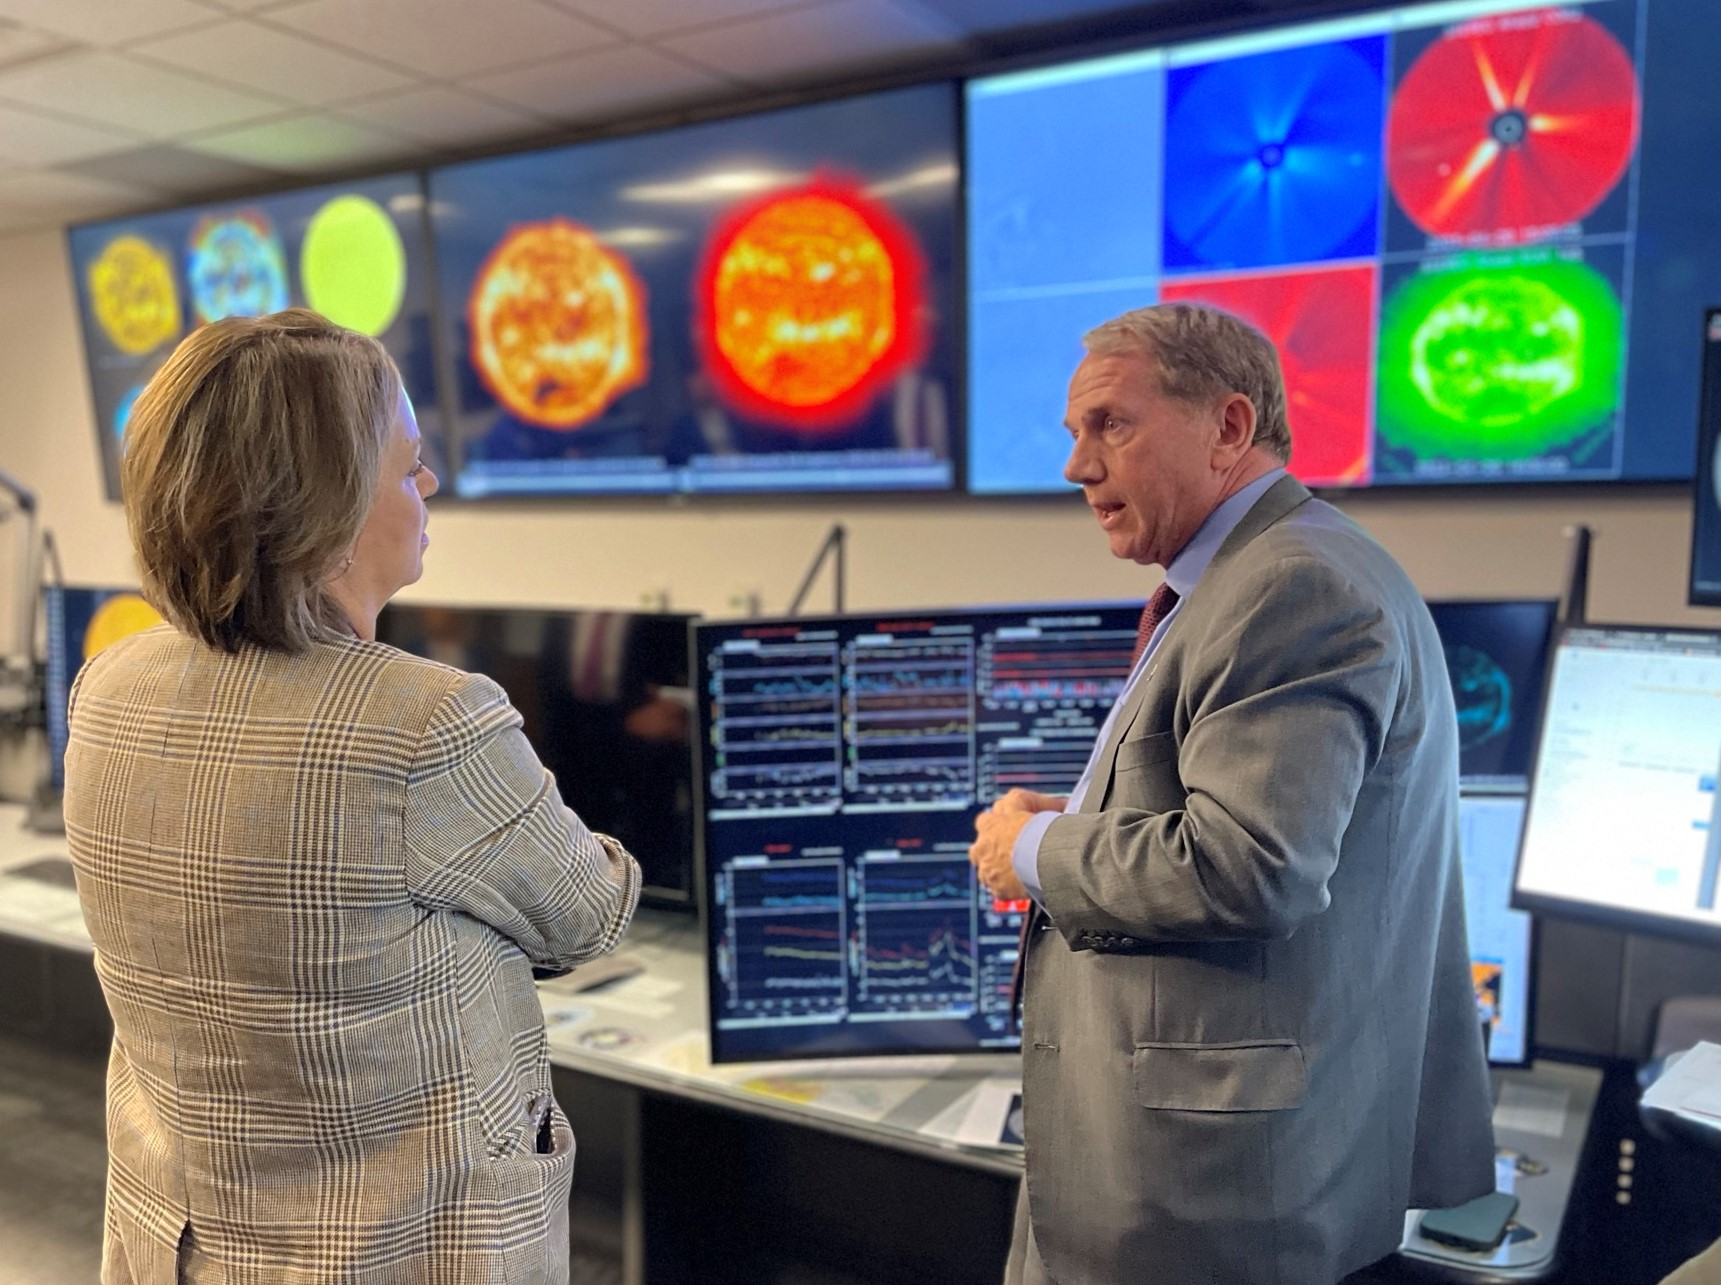 Bill Murtagh, SWPC, and Caitlin Durkovich, Special Assistant to the President and the Deputy Homeland Security Advisor for Resilience and Response, discuss space weather forecast operations at SWPC. 